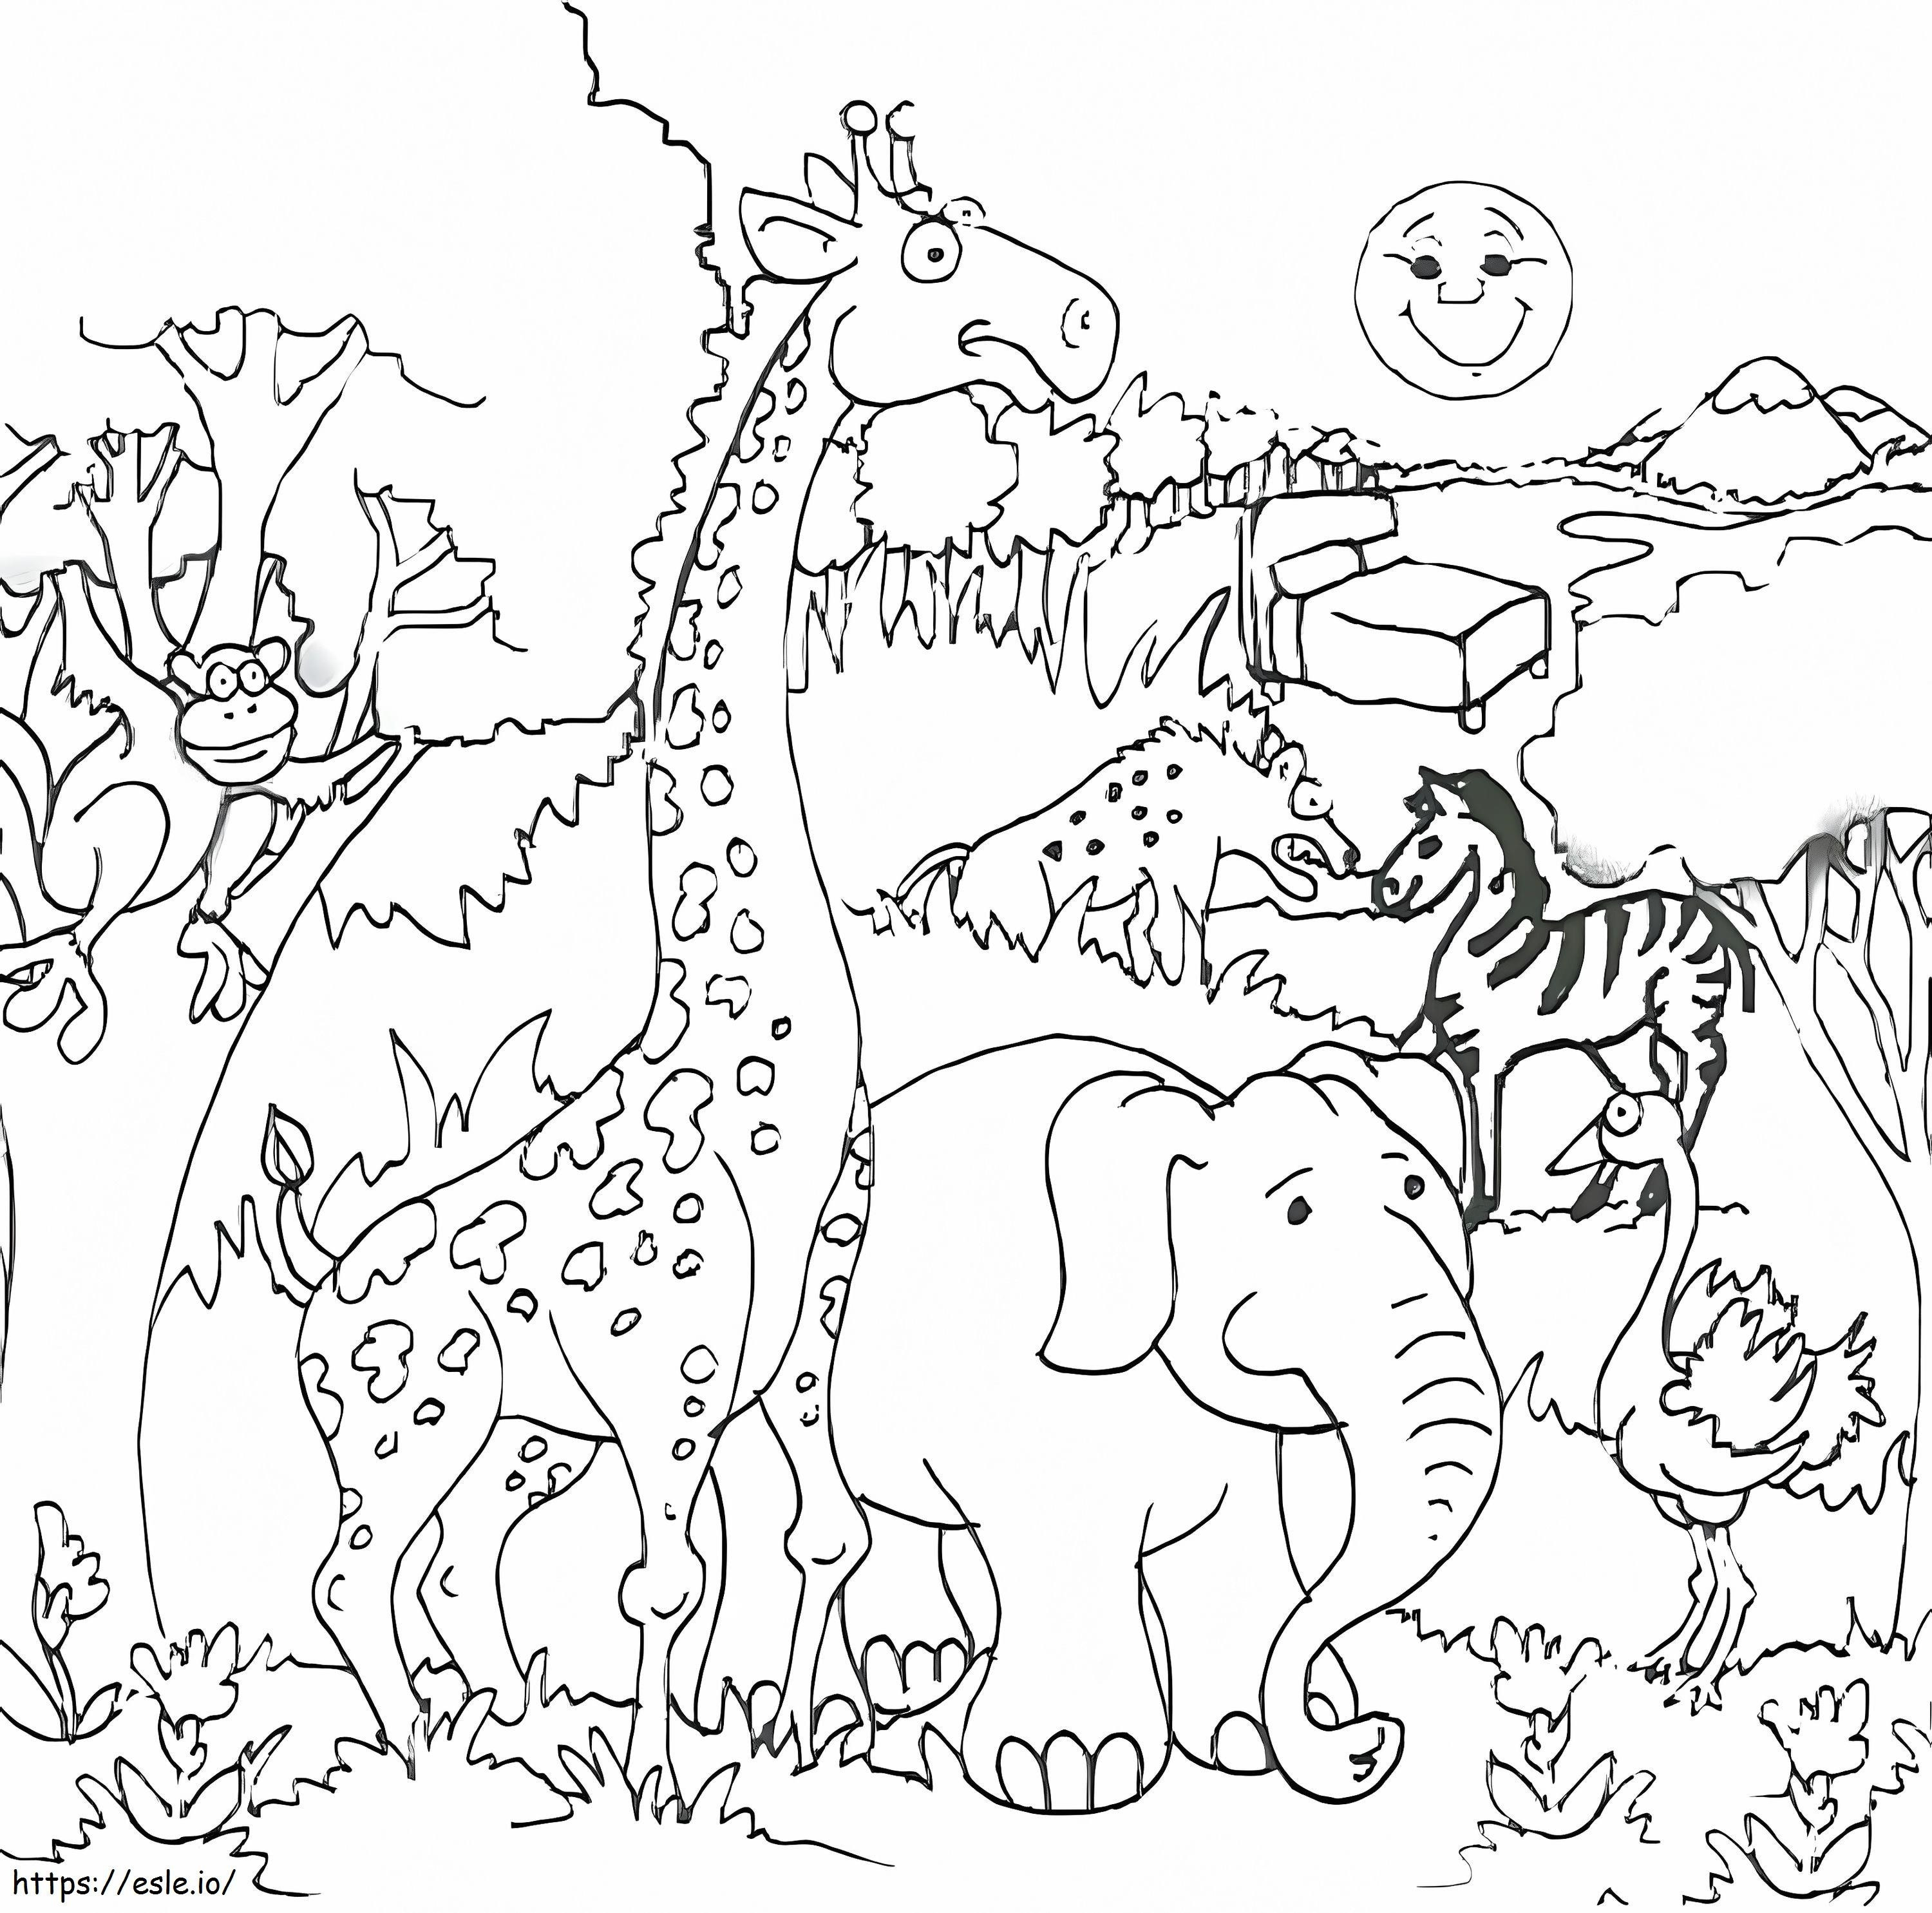 Funny Jungle coloring page